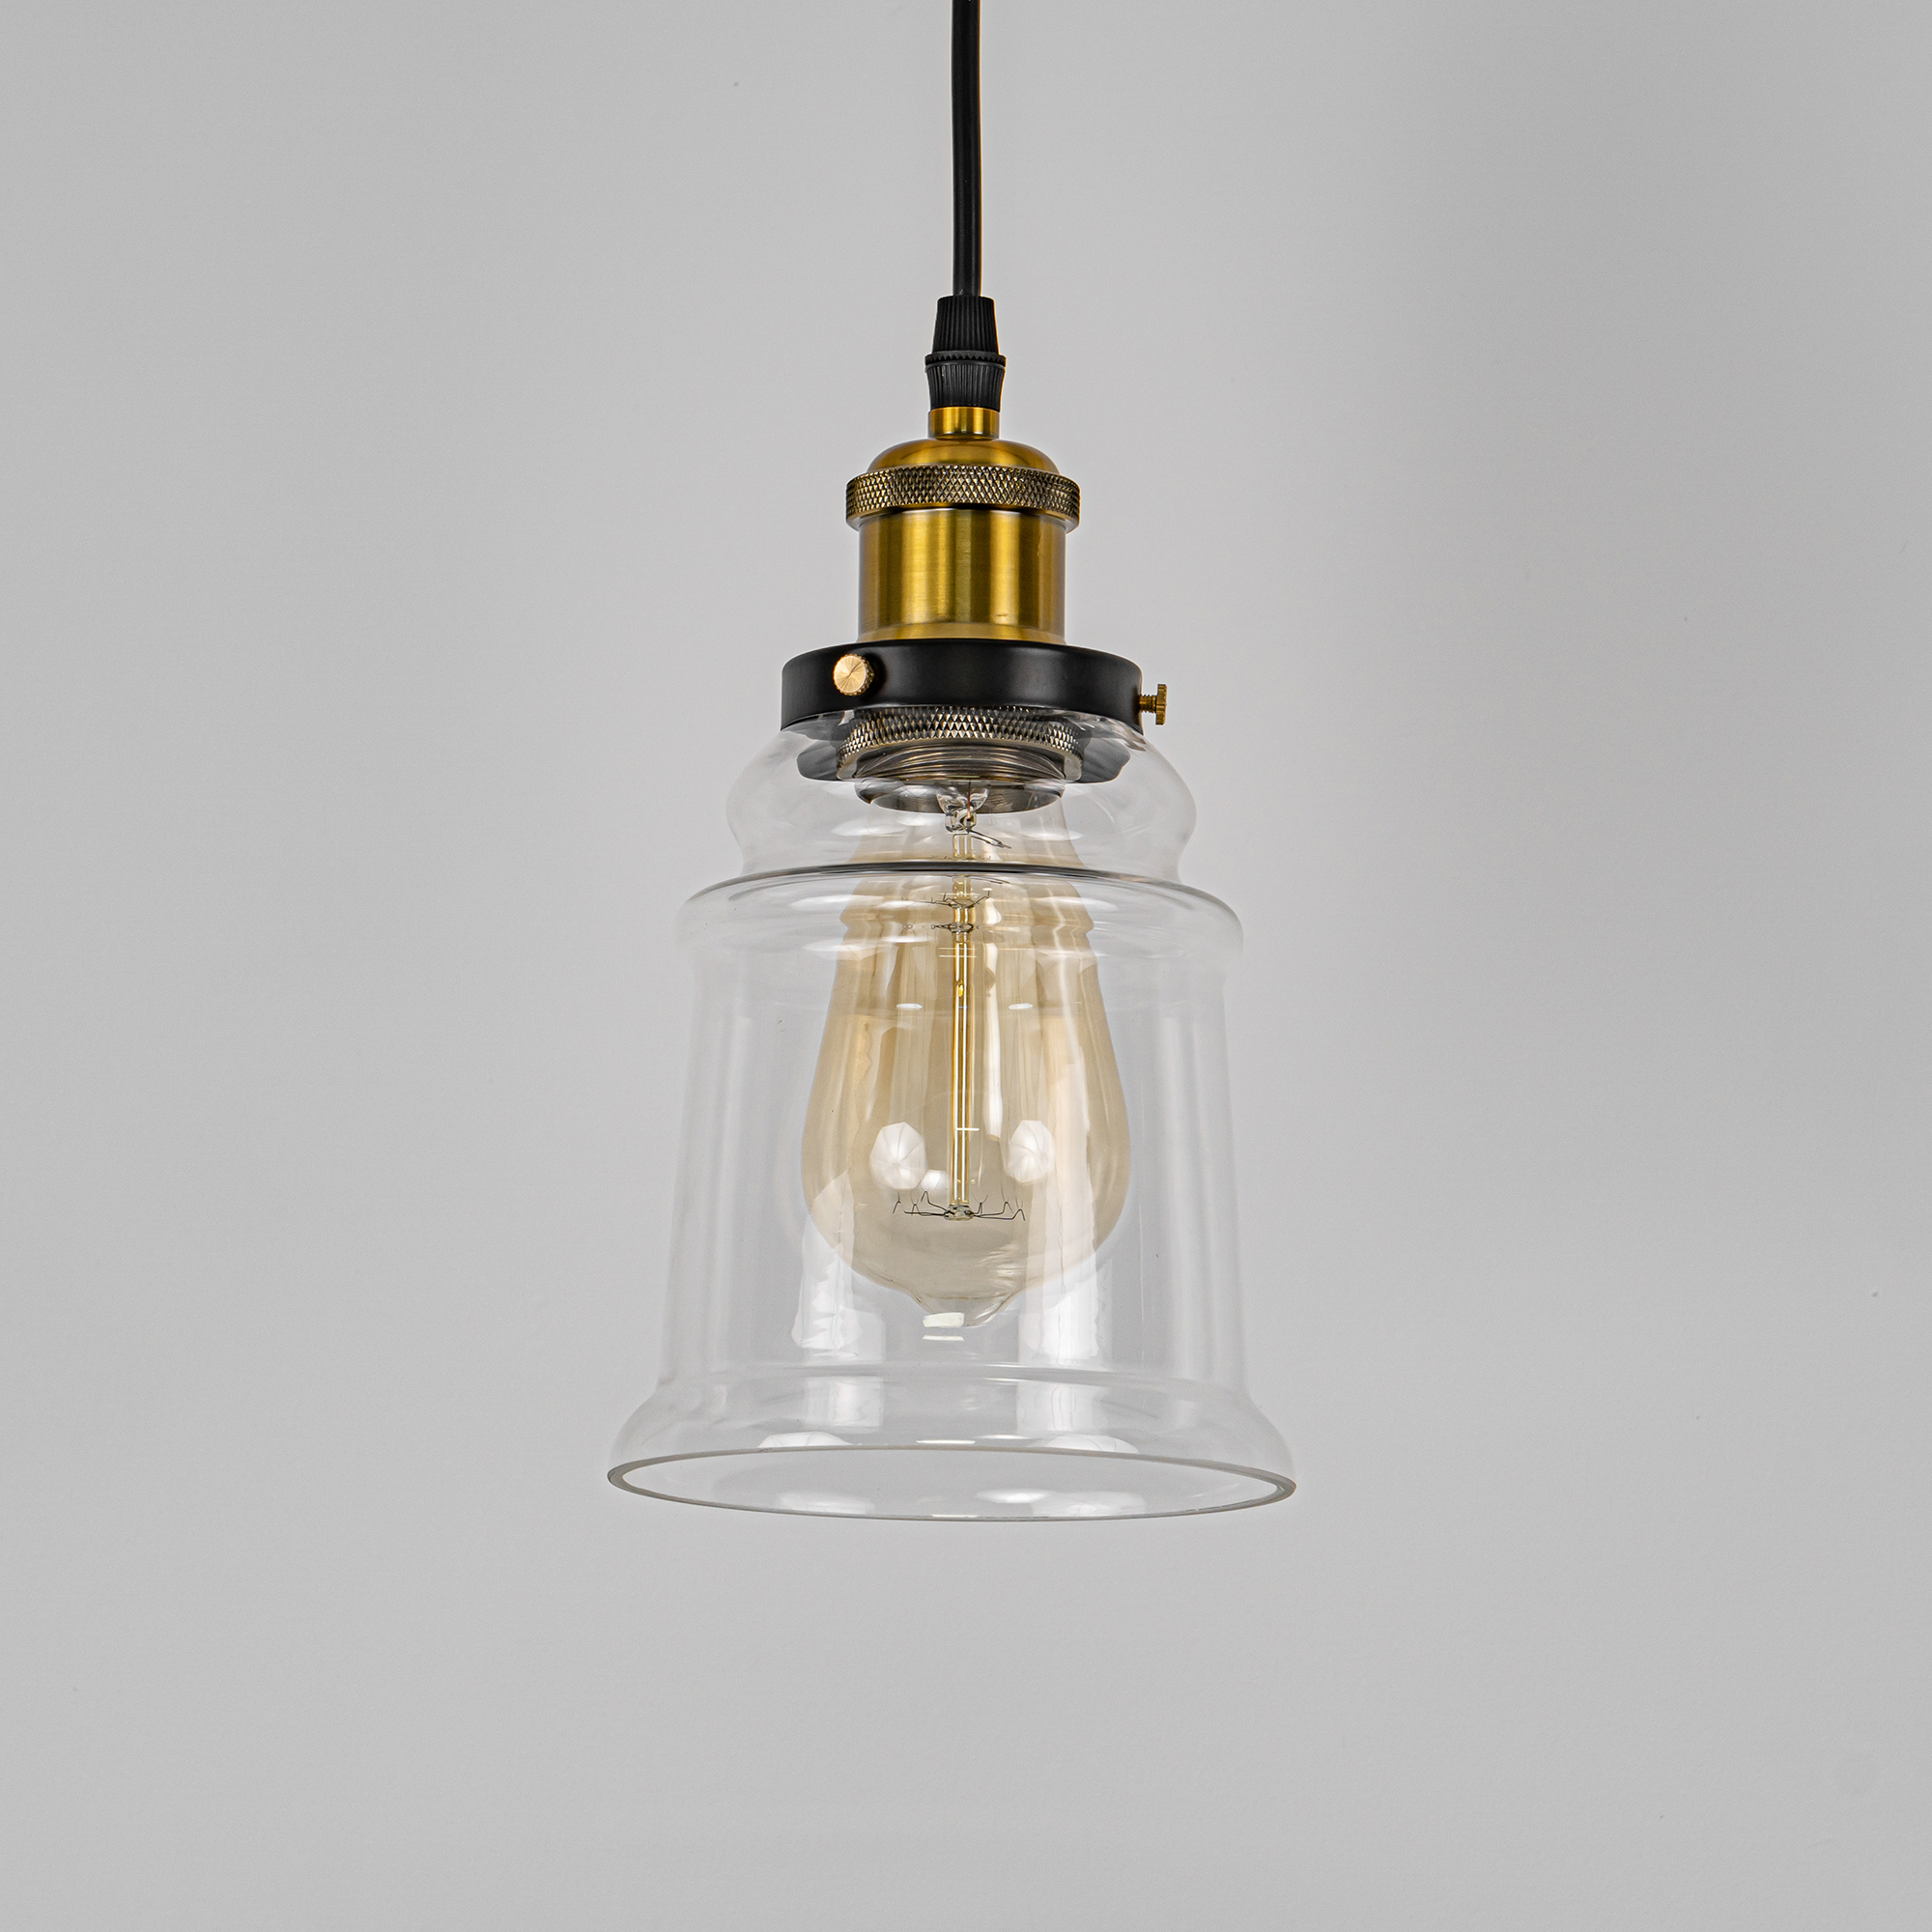 Kiven H-Type Track Lighting Industrial Kitchen Pendant Light Antique Brass  Hanging Fixture with Glass Shade Pack